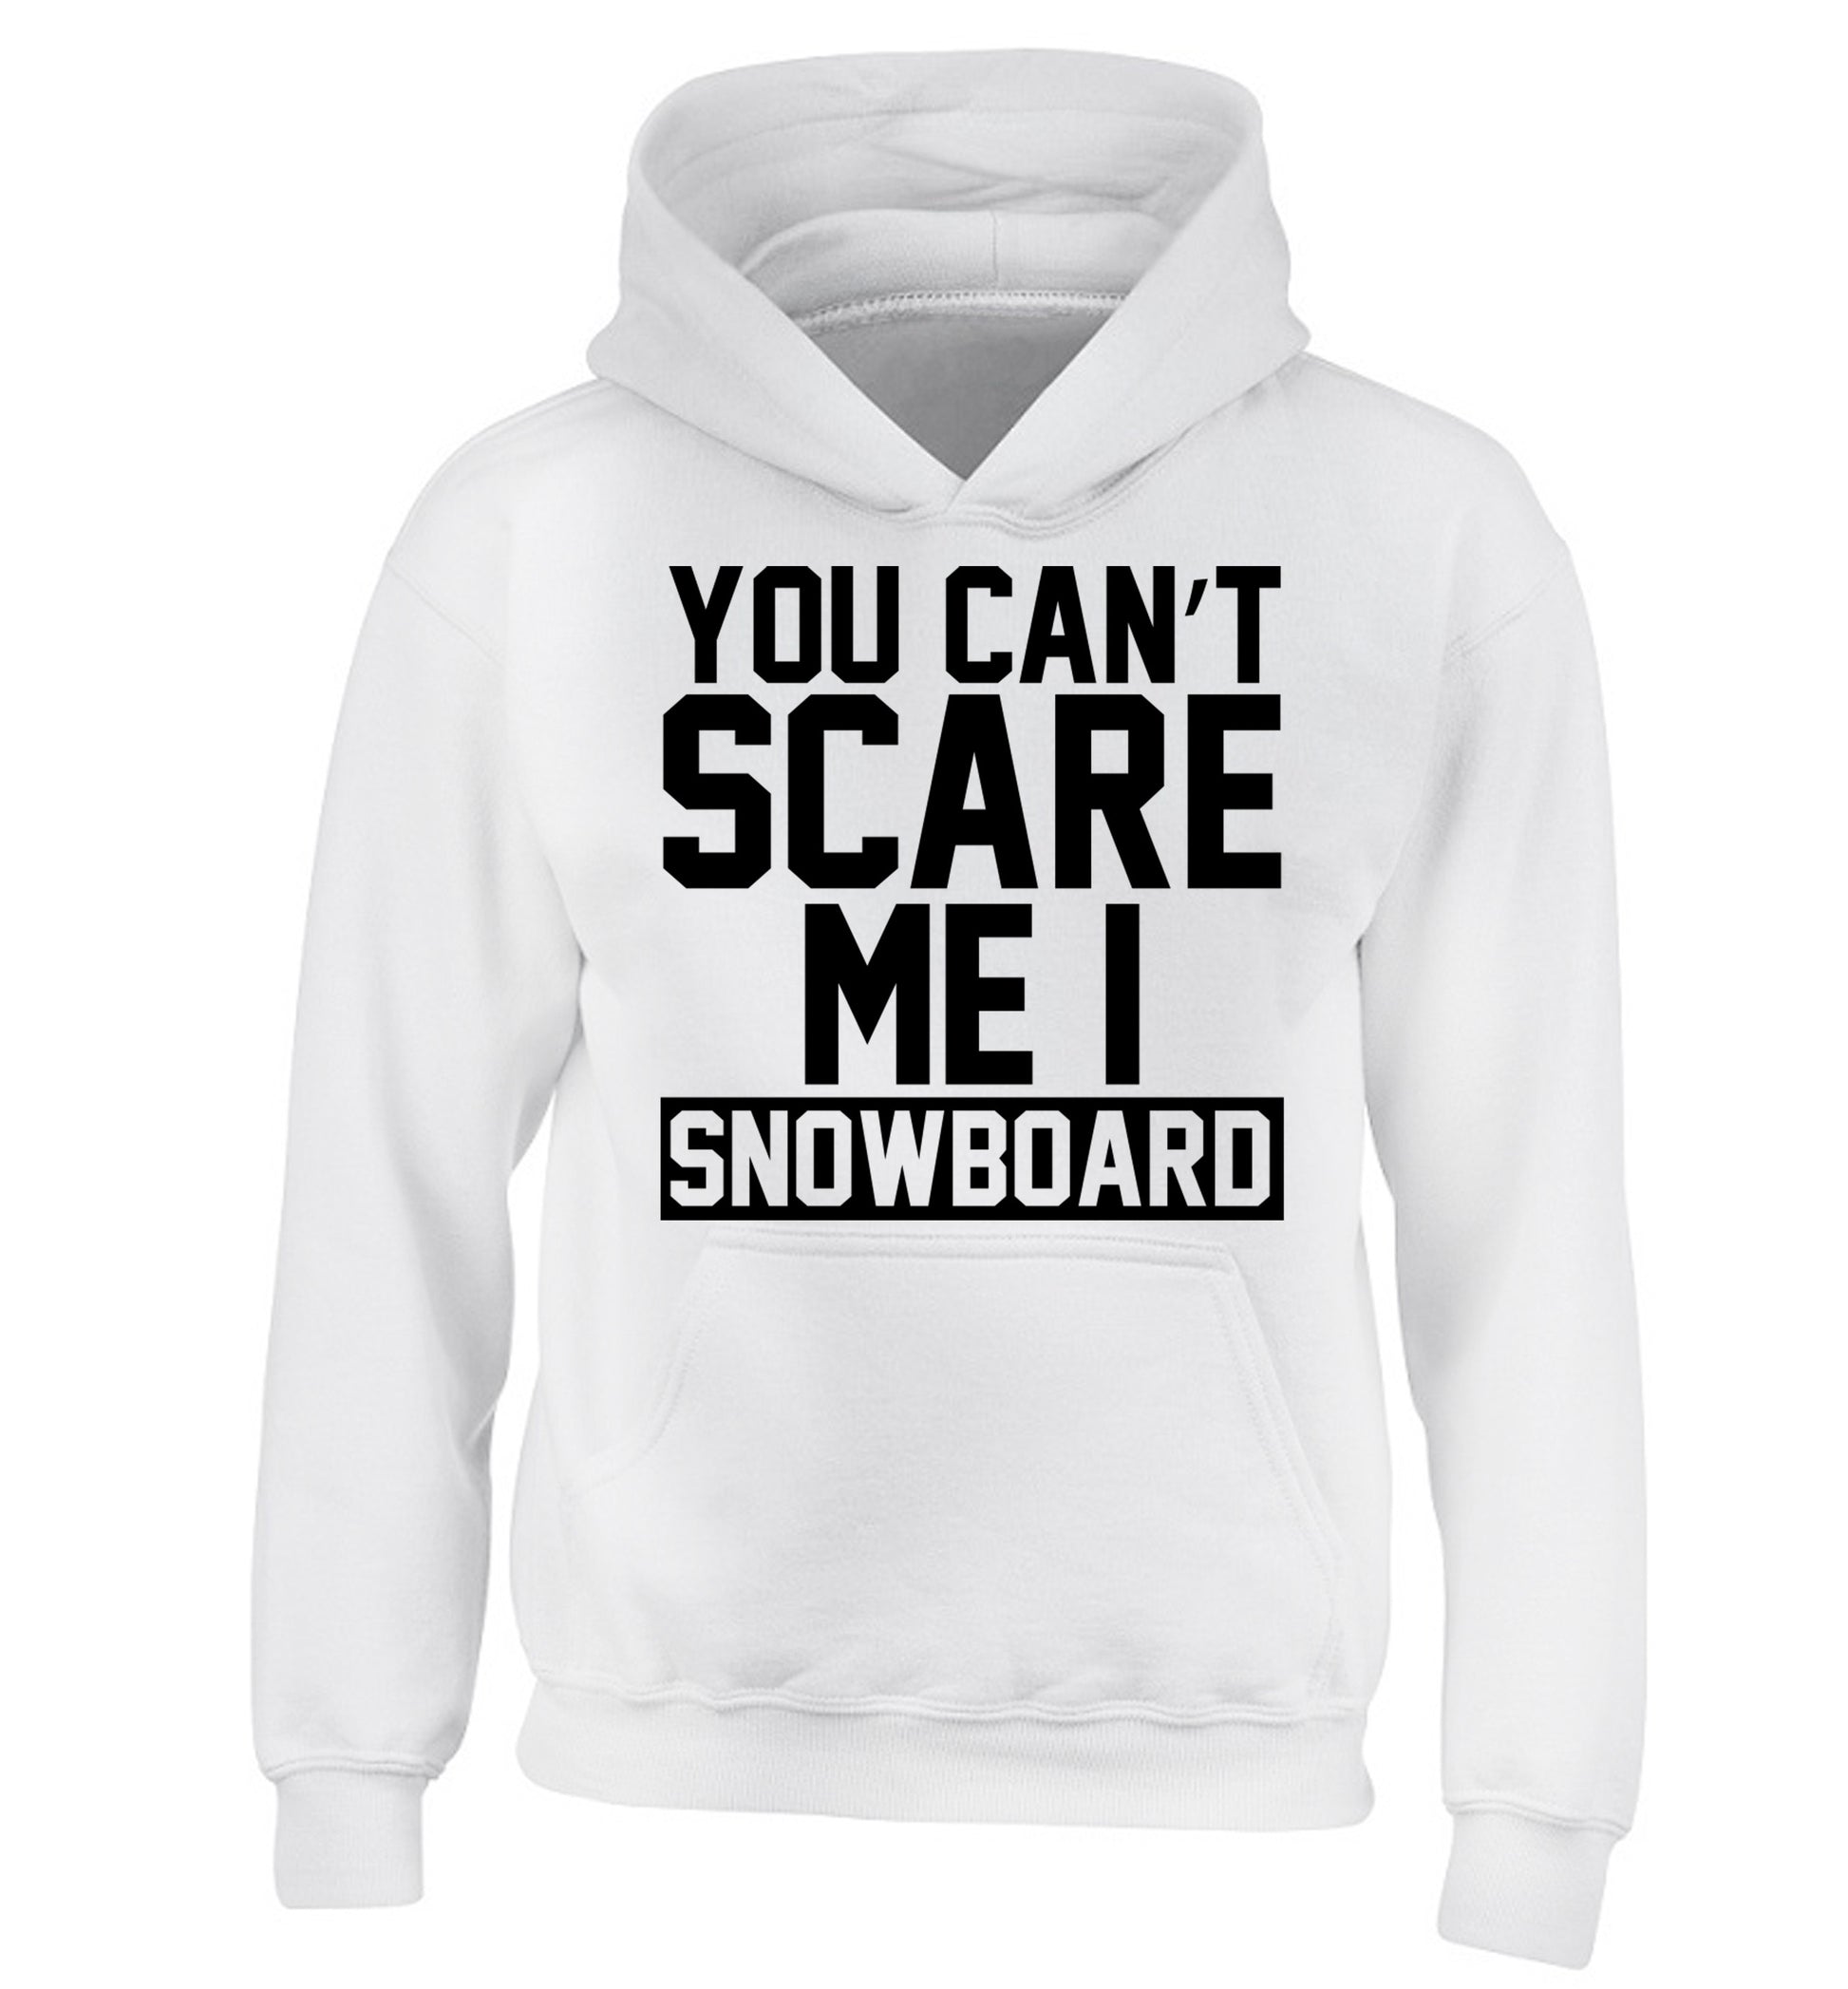 You can't scare me I snowboard children's white hoodie 12-14 Years